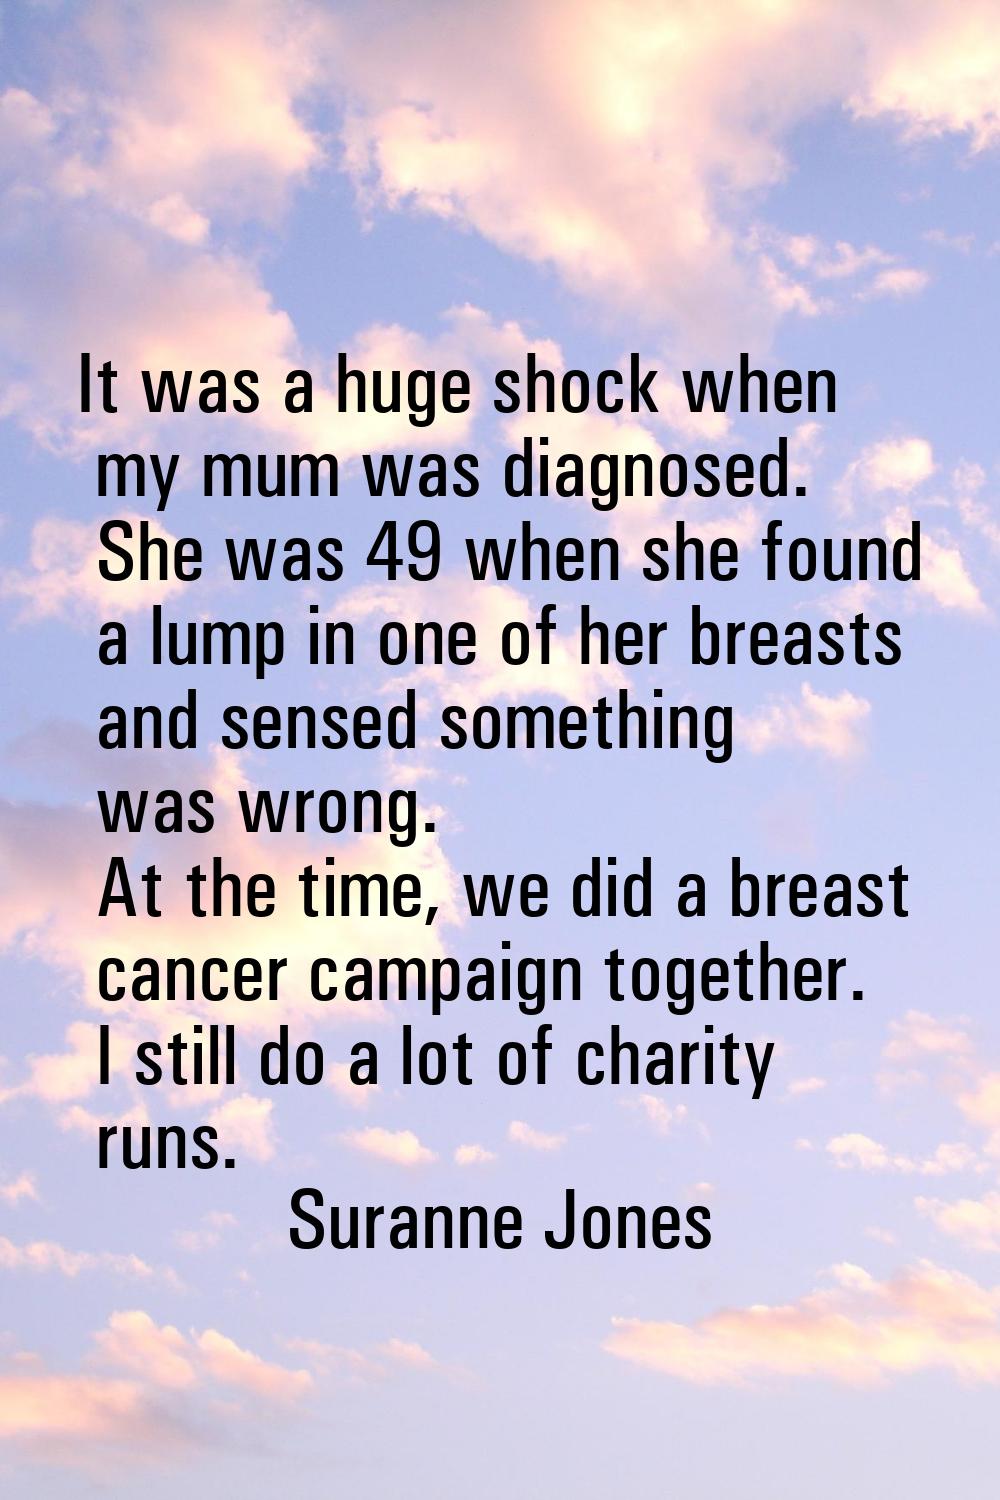 It was a huge shock when my mum was diagnosed. She was 49 when she found a lump in one of her breas